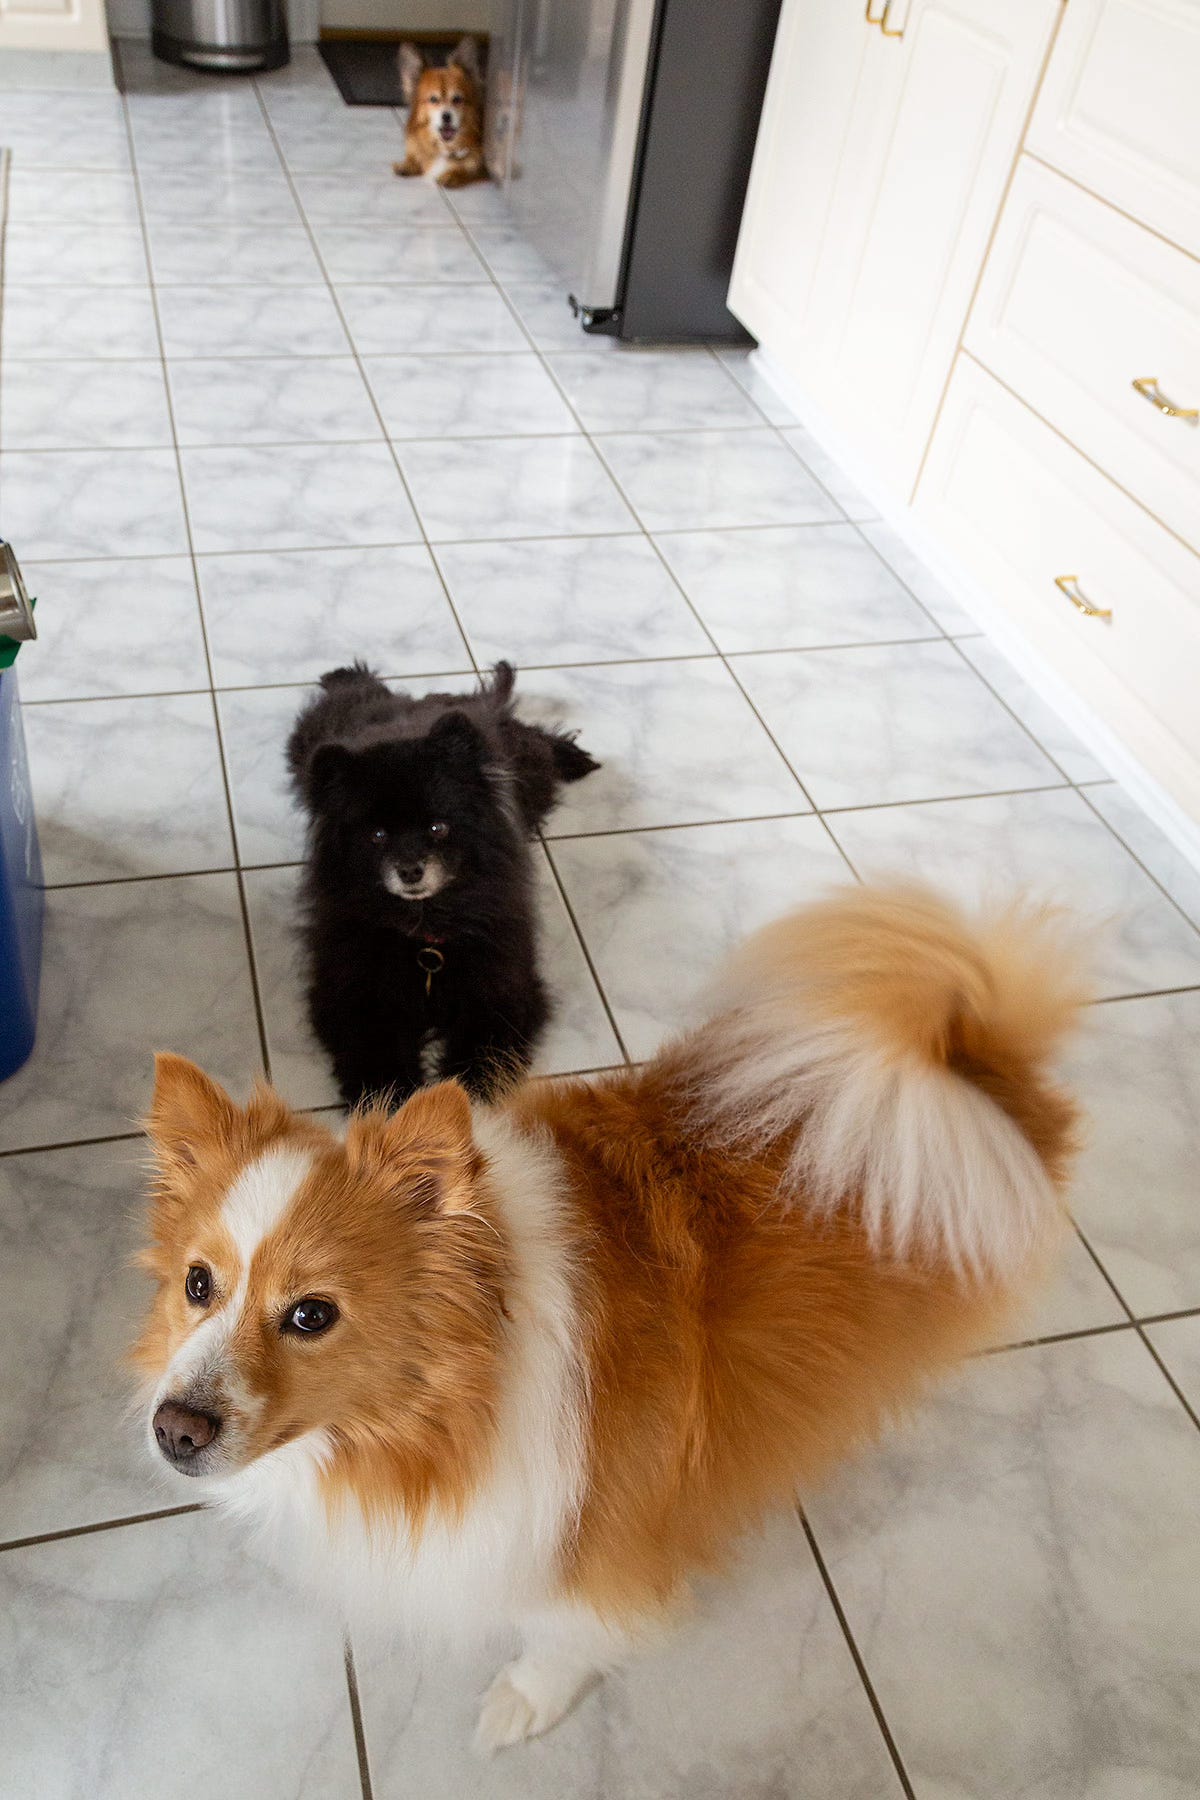 Foxley, Salem, and Arlo lined up in the kitchen, hoping for dropped food